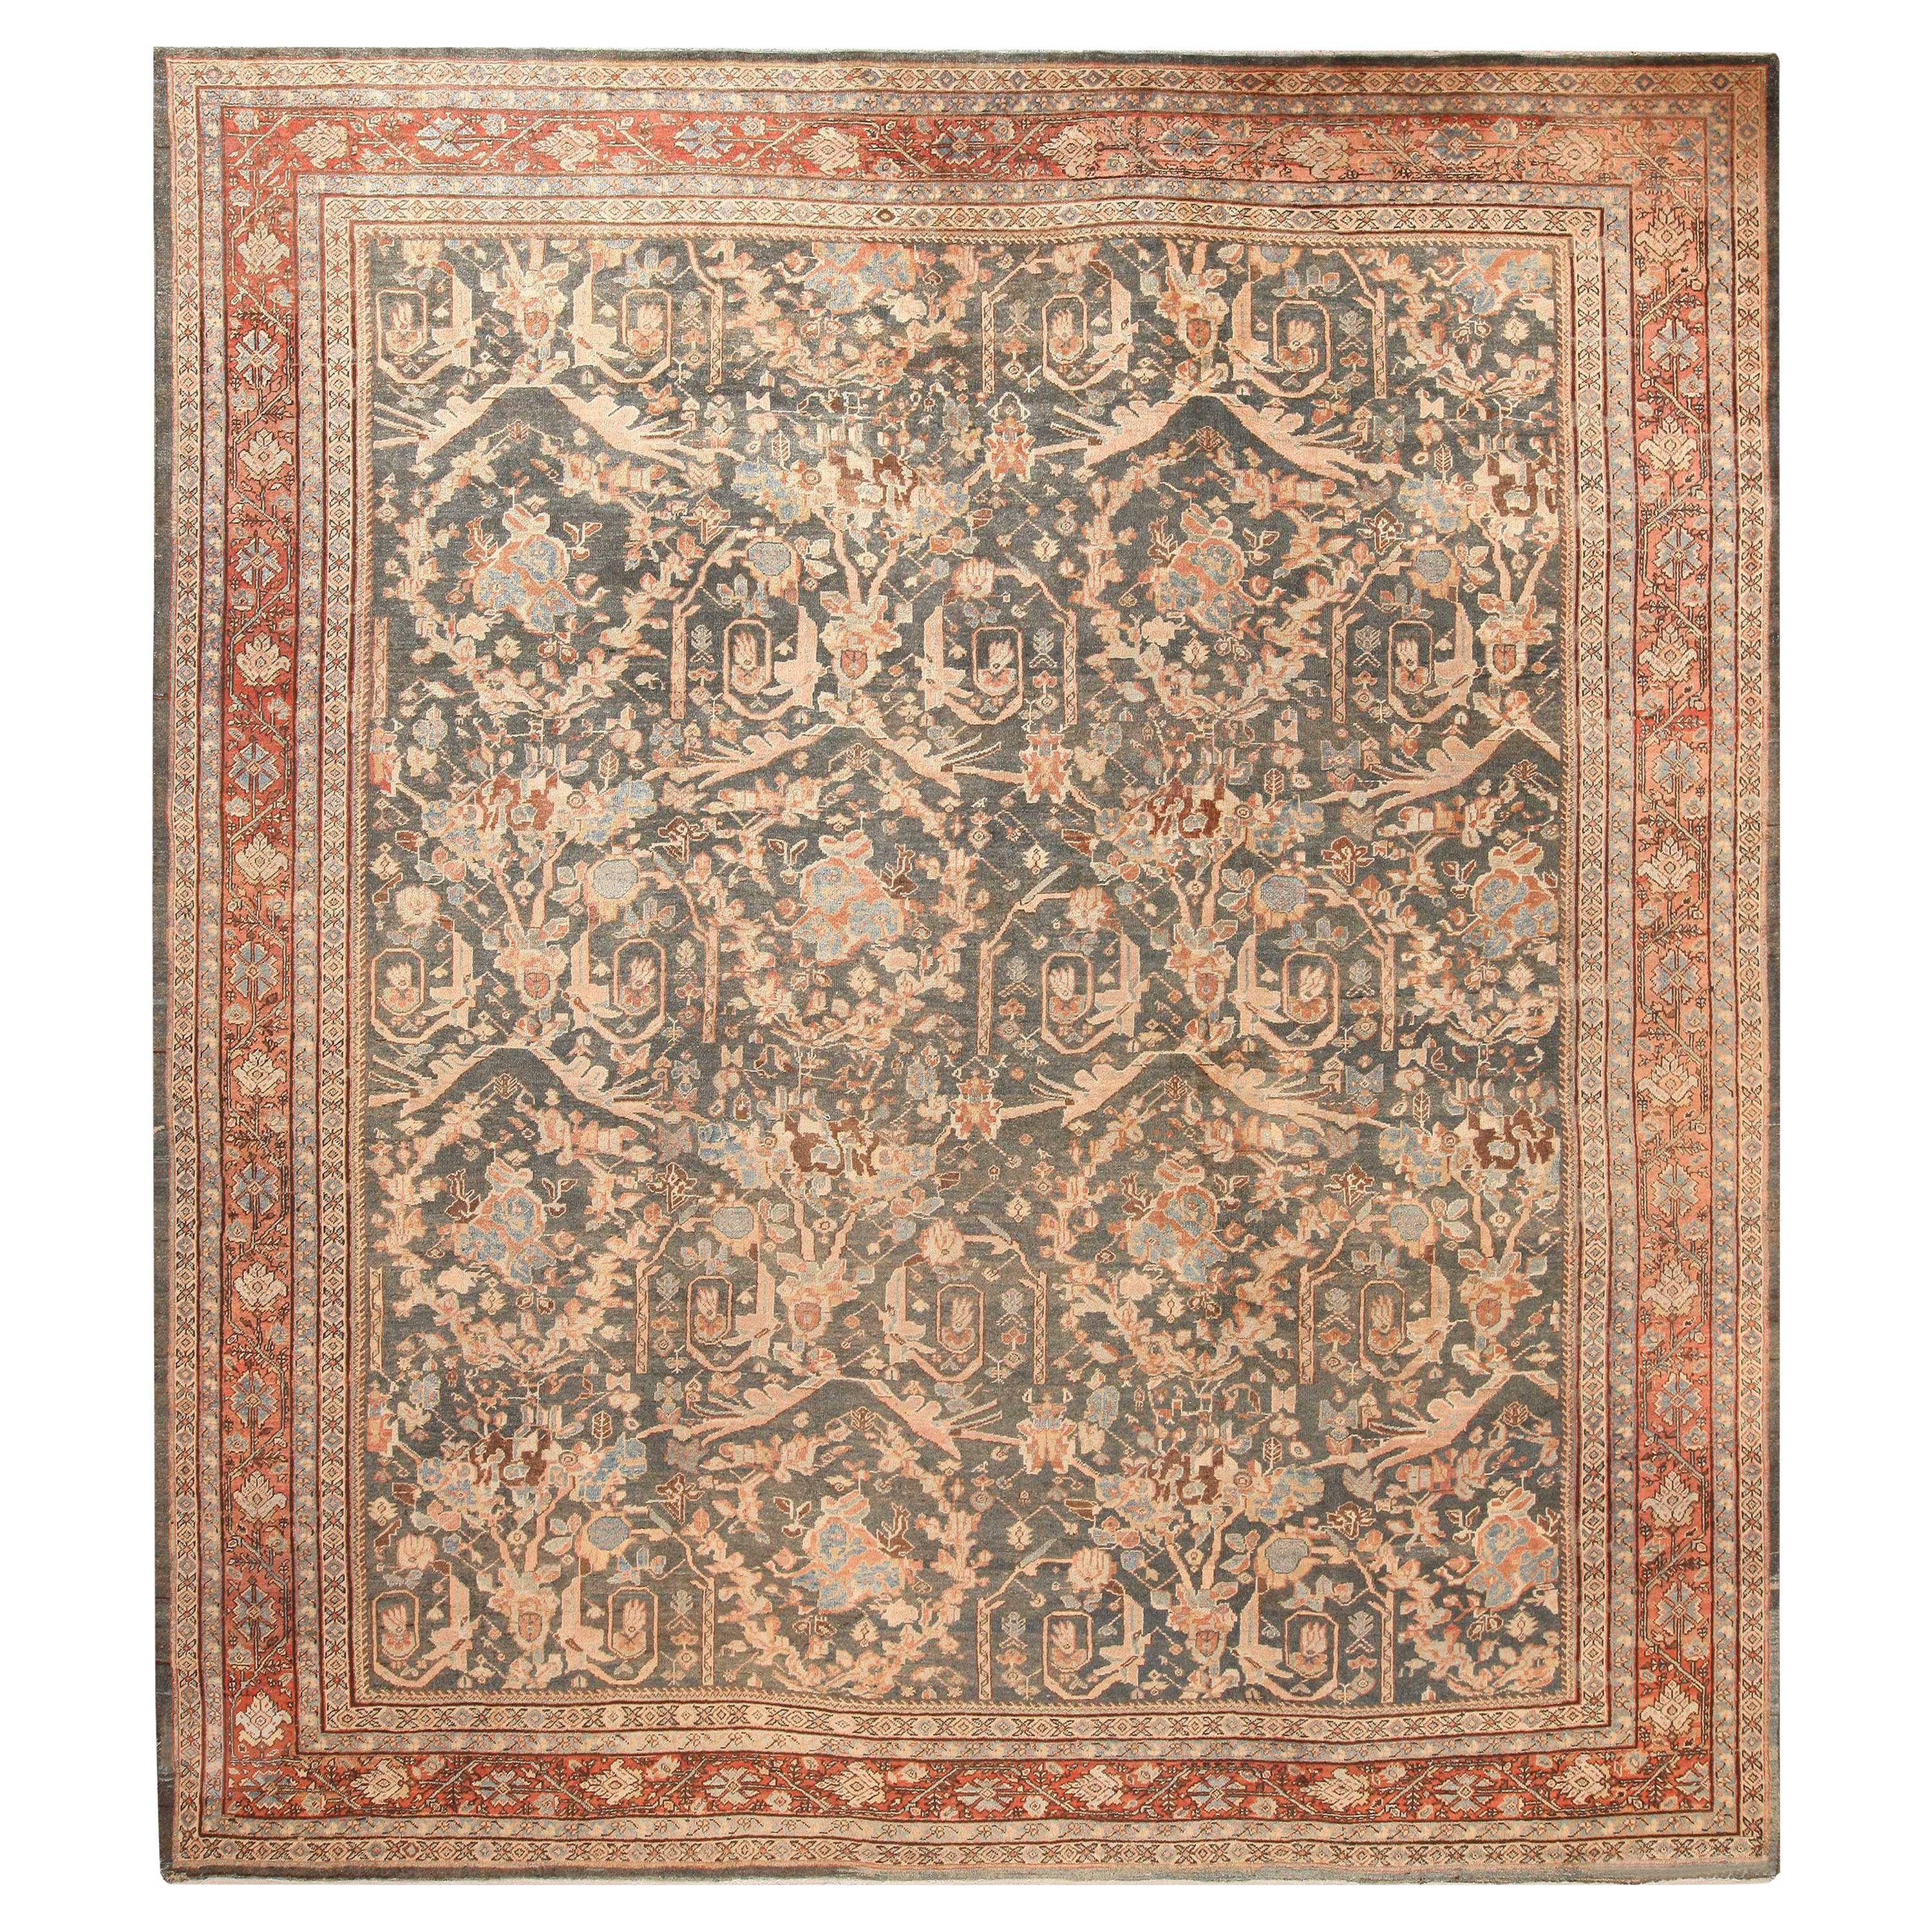 Mostofi Design Antique Persian Sultanabad Rug. 12 ft 5 in x 14 ft For Sale